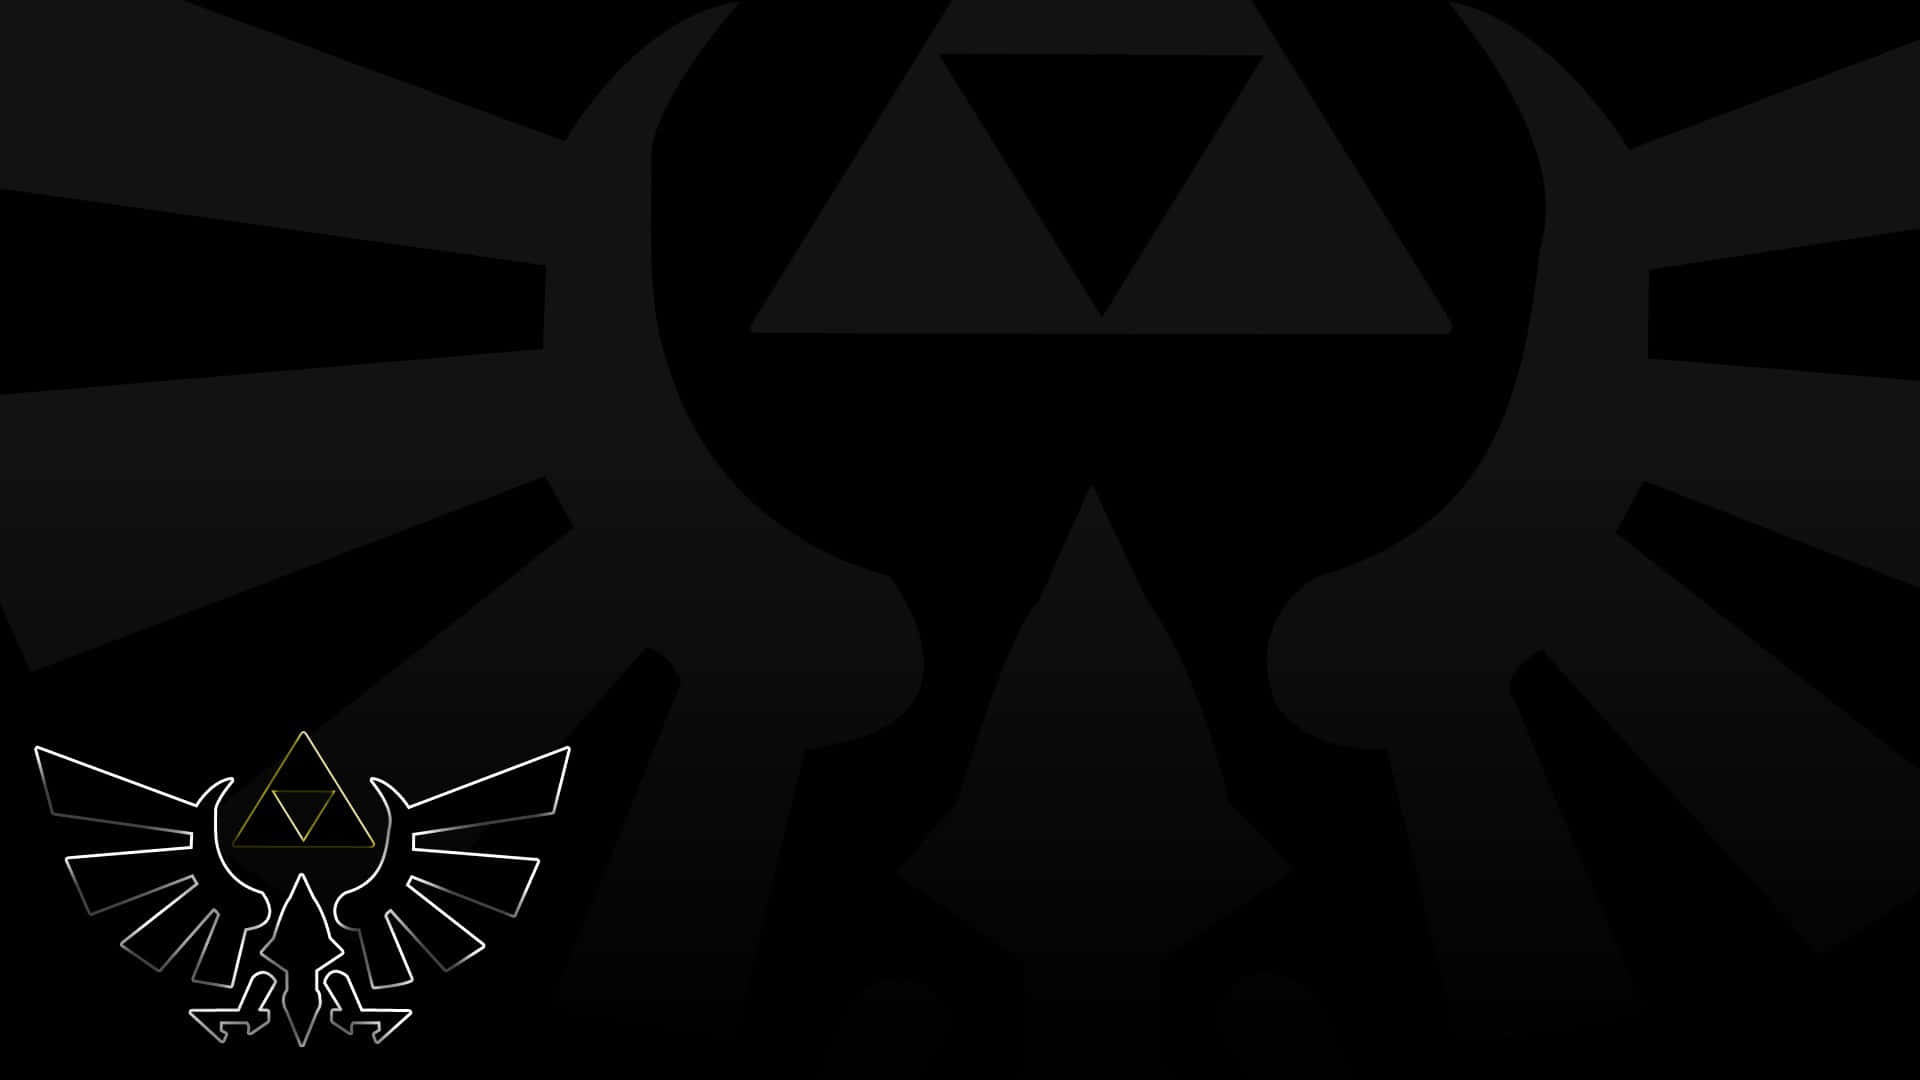 Image A Beautiful Representation Of The Legend Of Zelda's Triforce Background